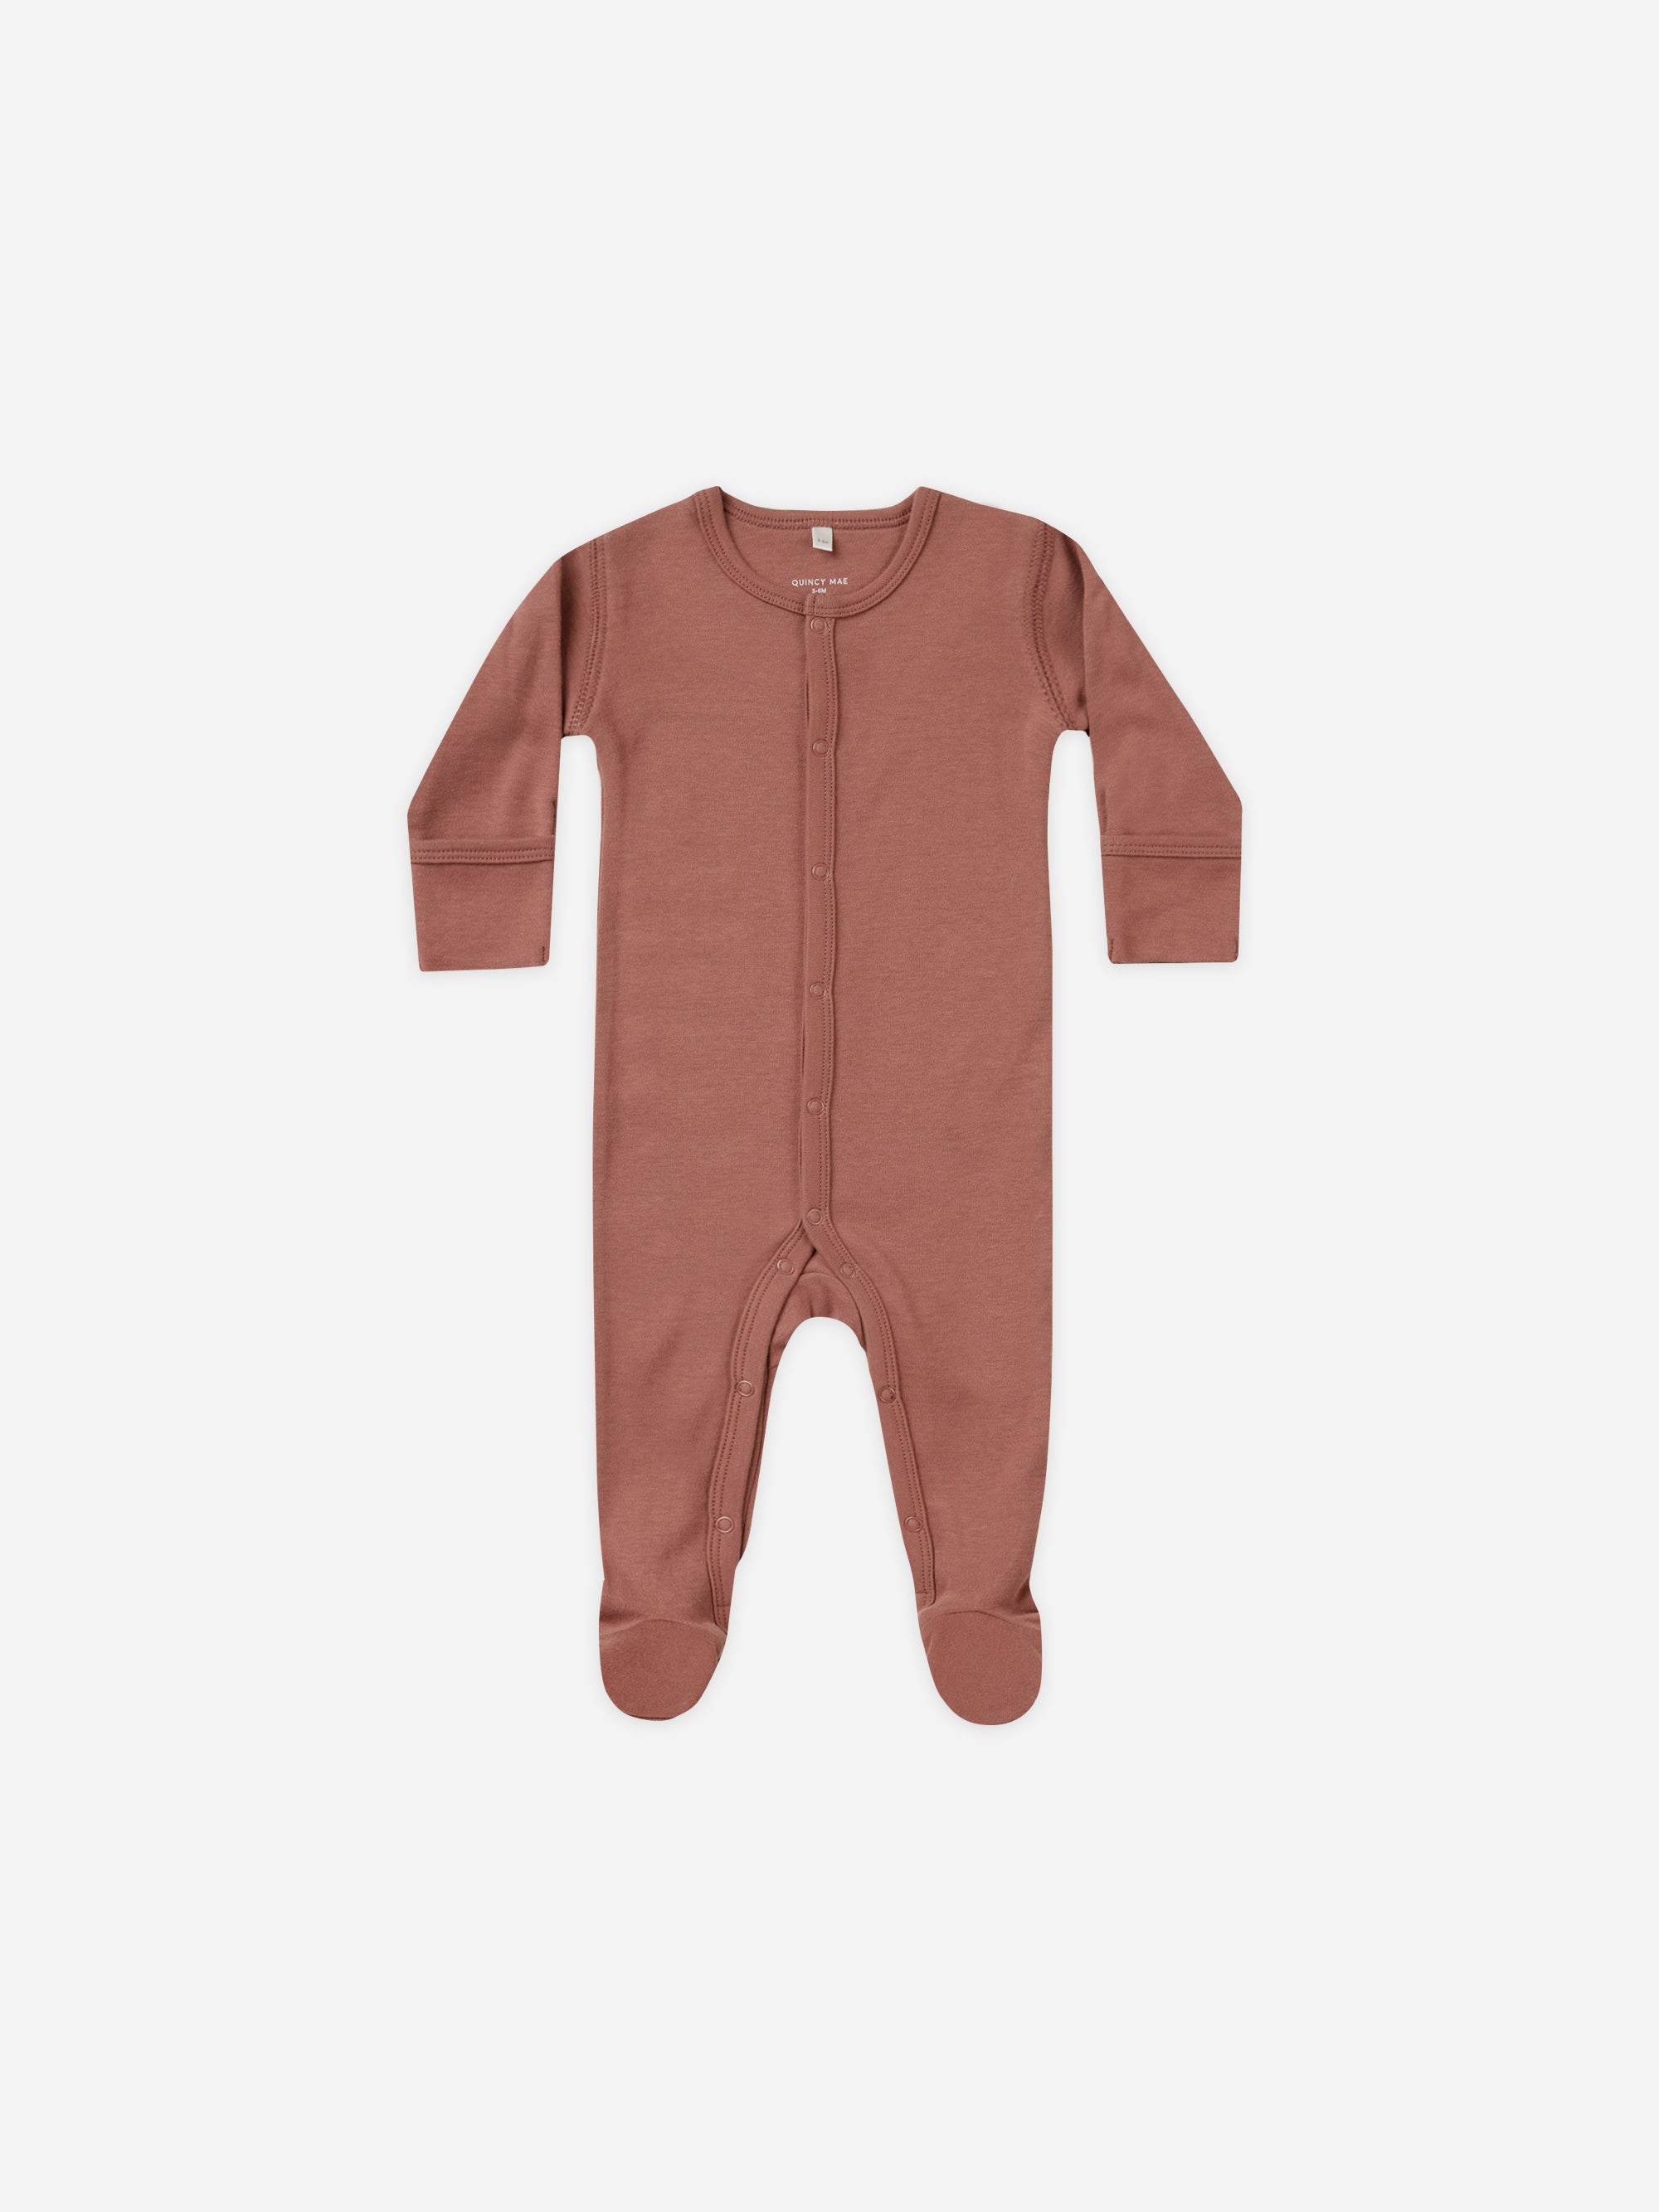 Full Snap Footie || Berry - Rylee + Cru | Kids Clothes | Trendy Baby Clothes | Modern Infant Outfits |